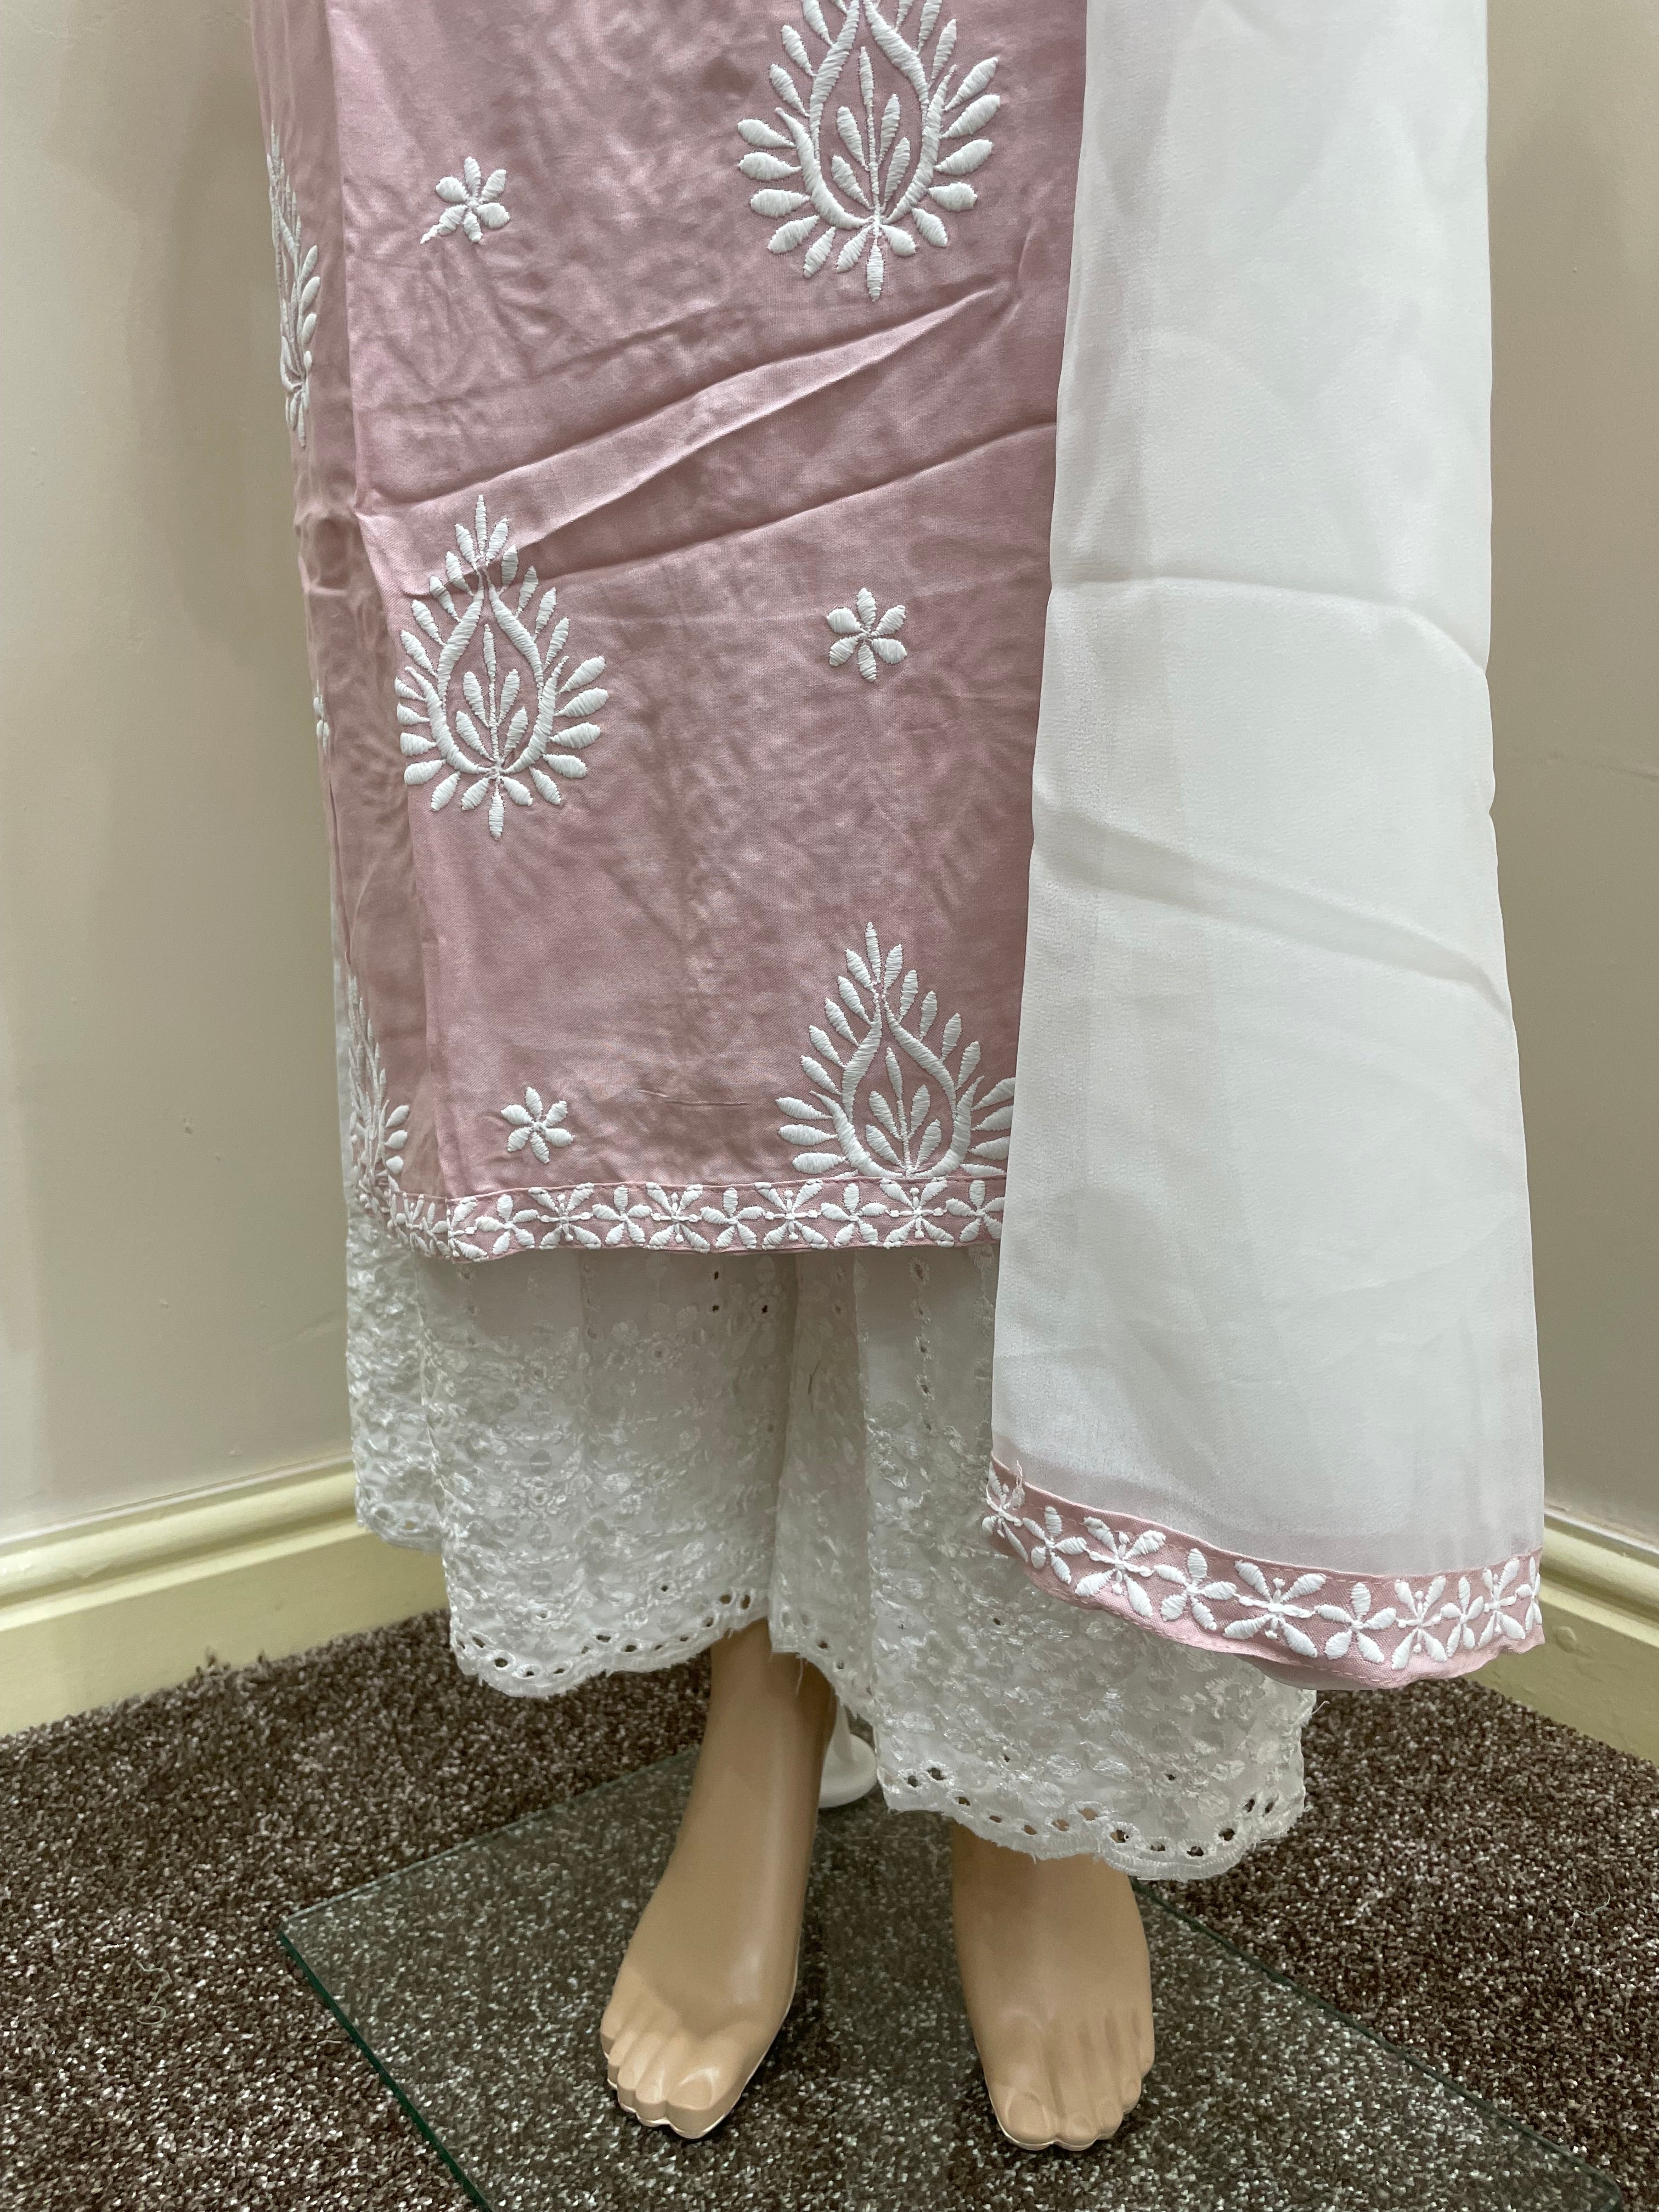 Light Pink Kameez with white Platzo Trousers